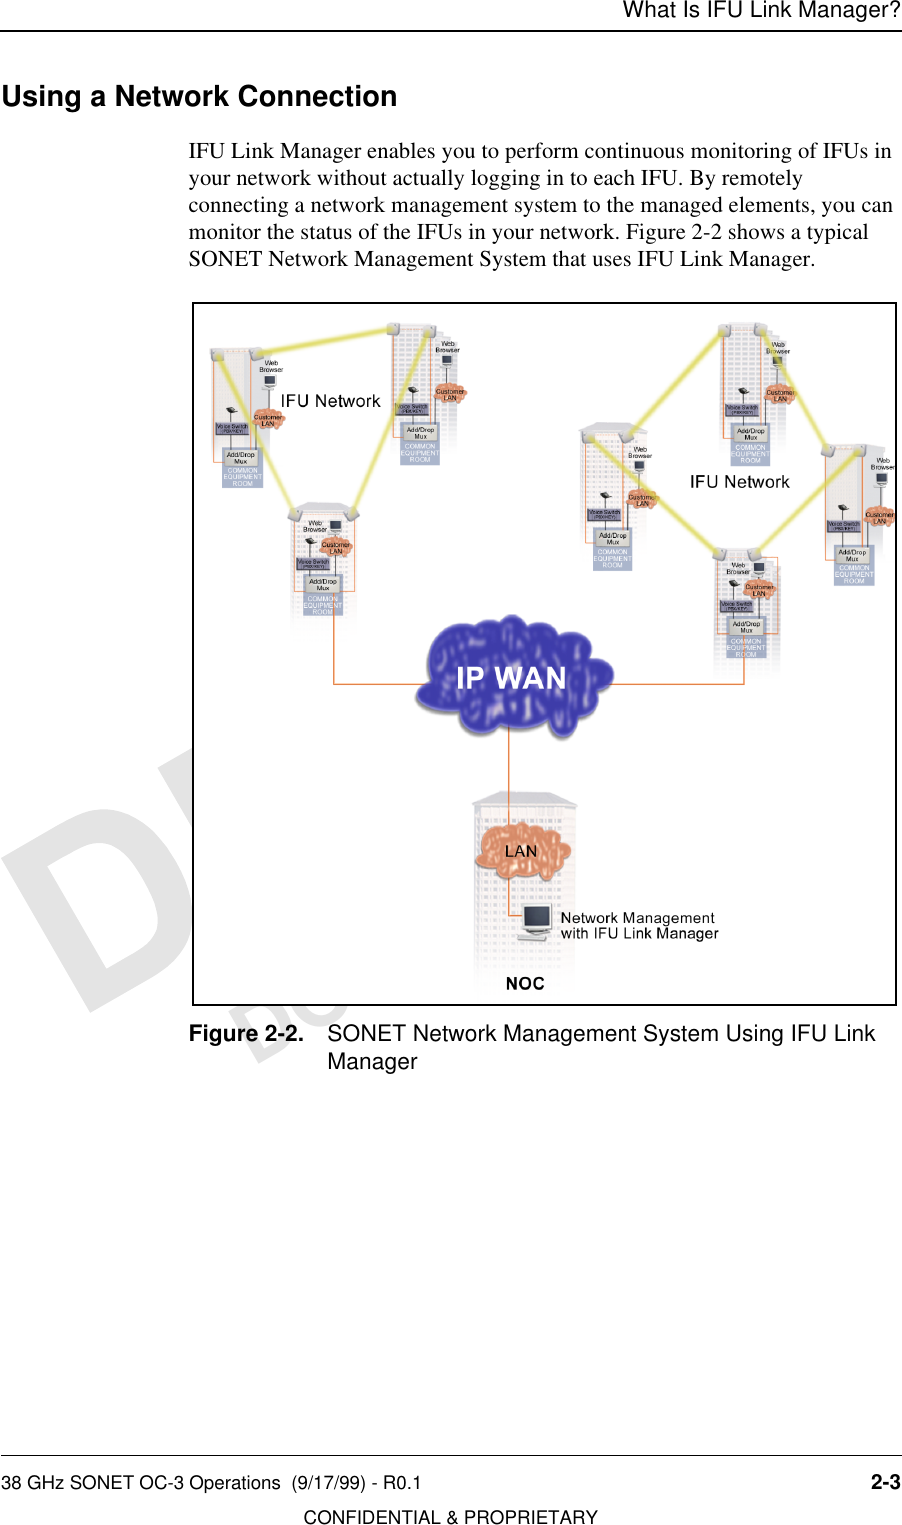 What Is IFU Link Manager?38 GHz SONET OC-3 Operations  (9/17/99) - R0.1 2-3CONFIDENTIAL &amp; PROPRIETARYDO NOT COPYUsing a Network ConnectionIFU Link Manager enables you to perform continuous monitoring of IFUs in your network without actually logging in to each IFU. By remotely connecting a network management system to the managed elements, you can monitor the status of the IFUs in your network. Figure 2-2 shows a typical SONET Network Management System that uses IFU Link Manager.Figure 2-2. SONET Network Management System Using IFU Link Manager